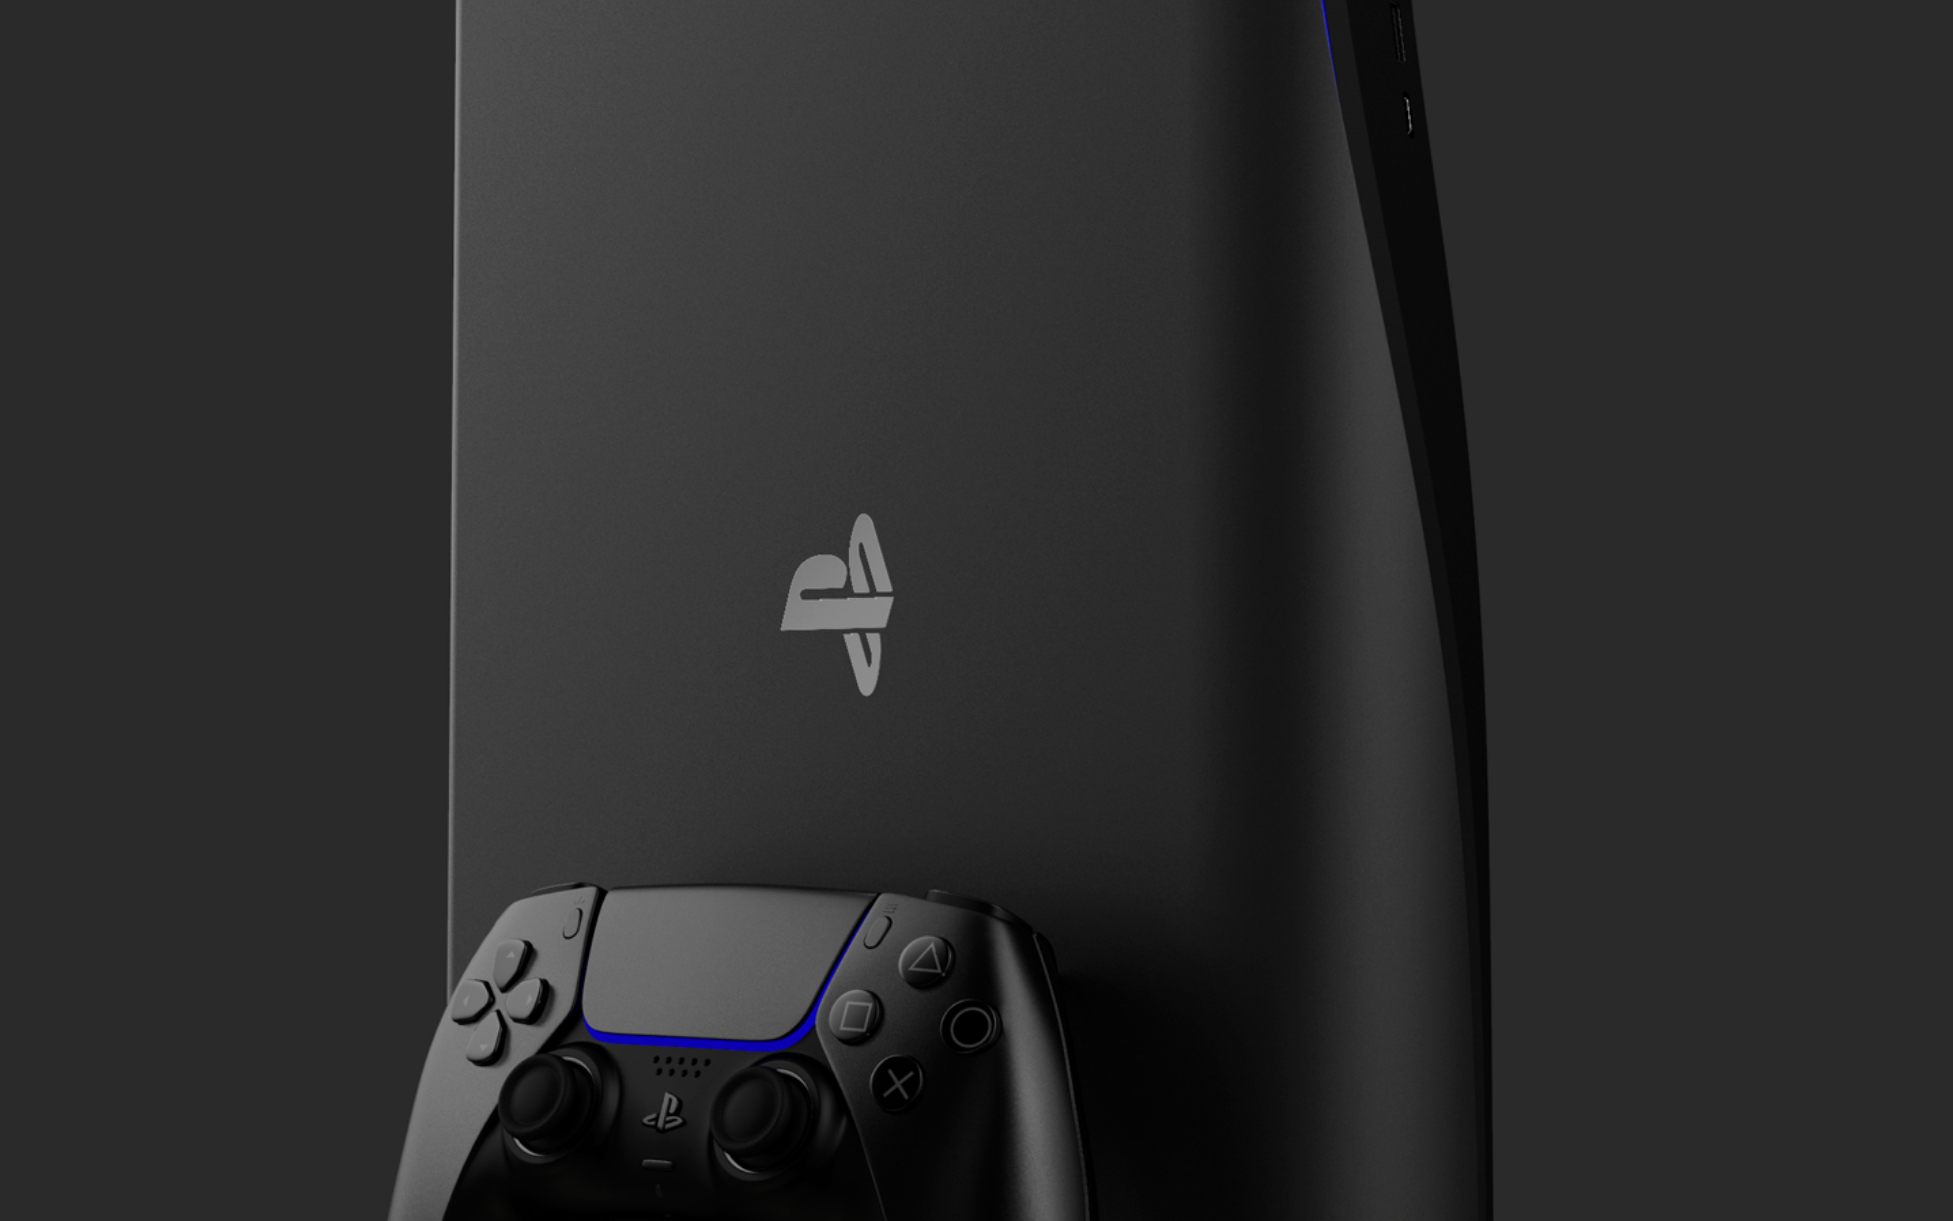 PS5 Pro – is it worth the wait?  For me it's not that clear